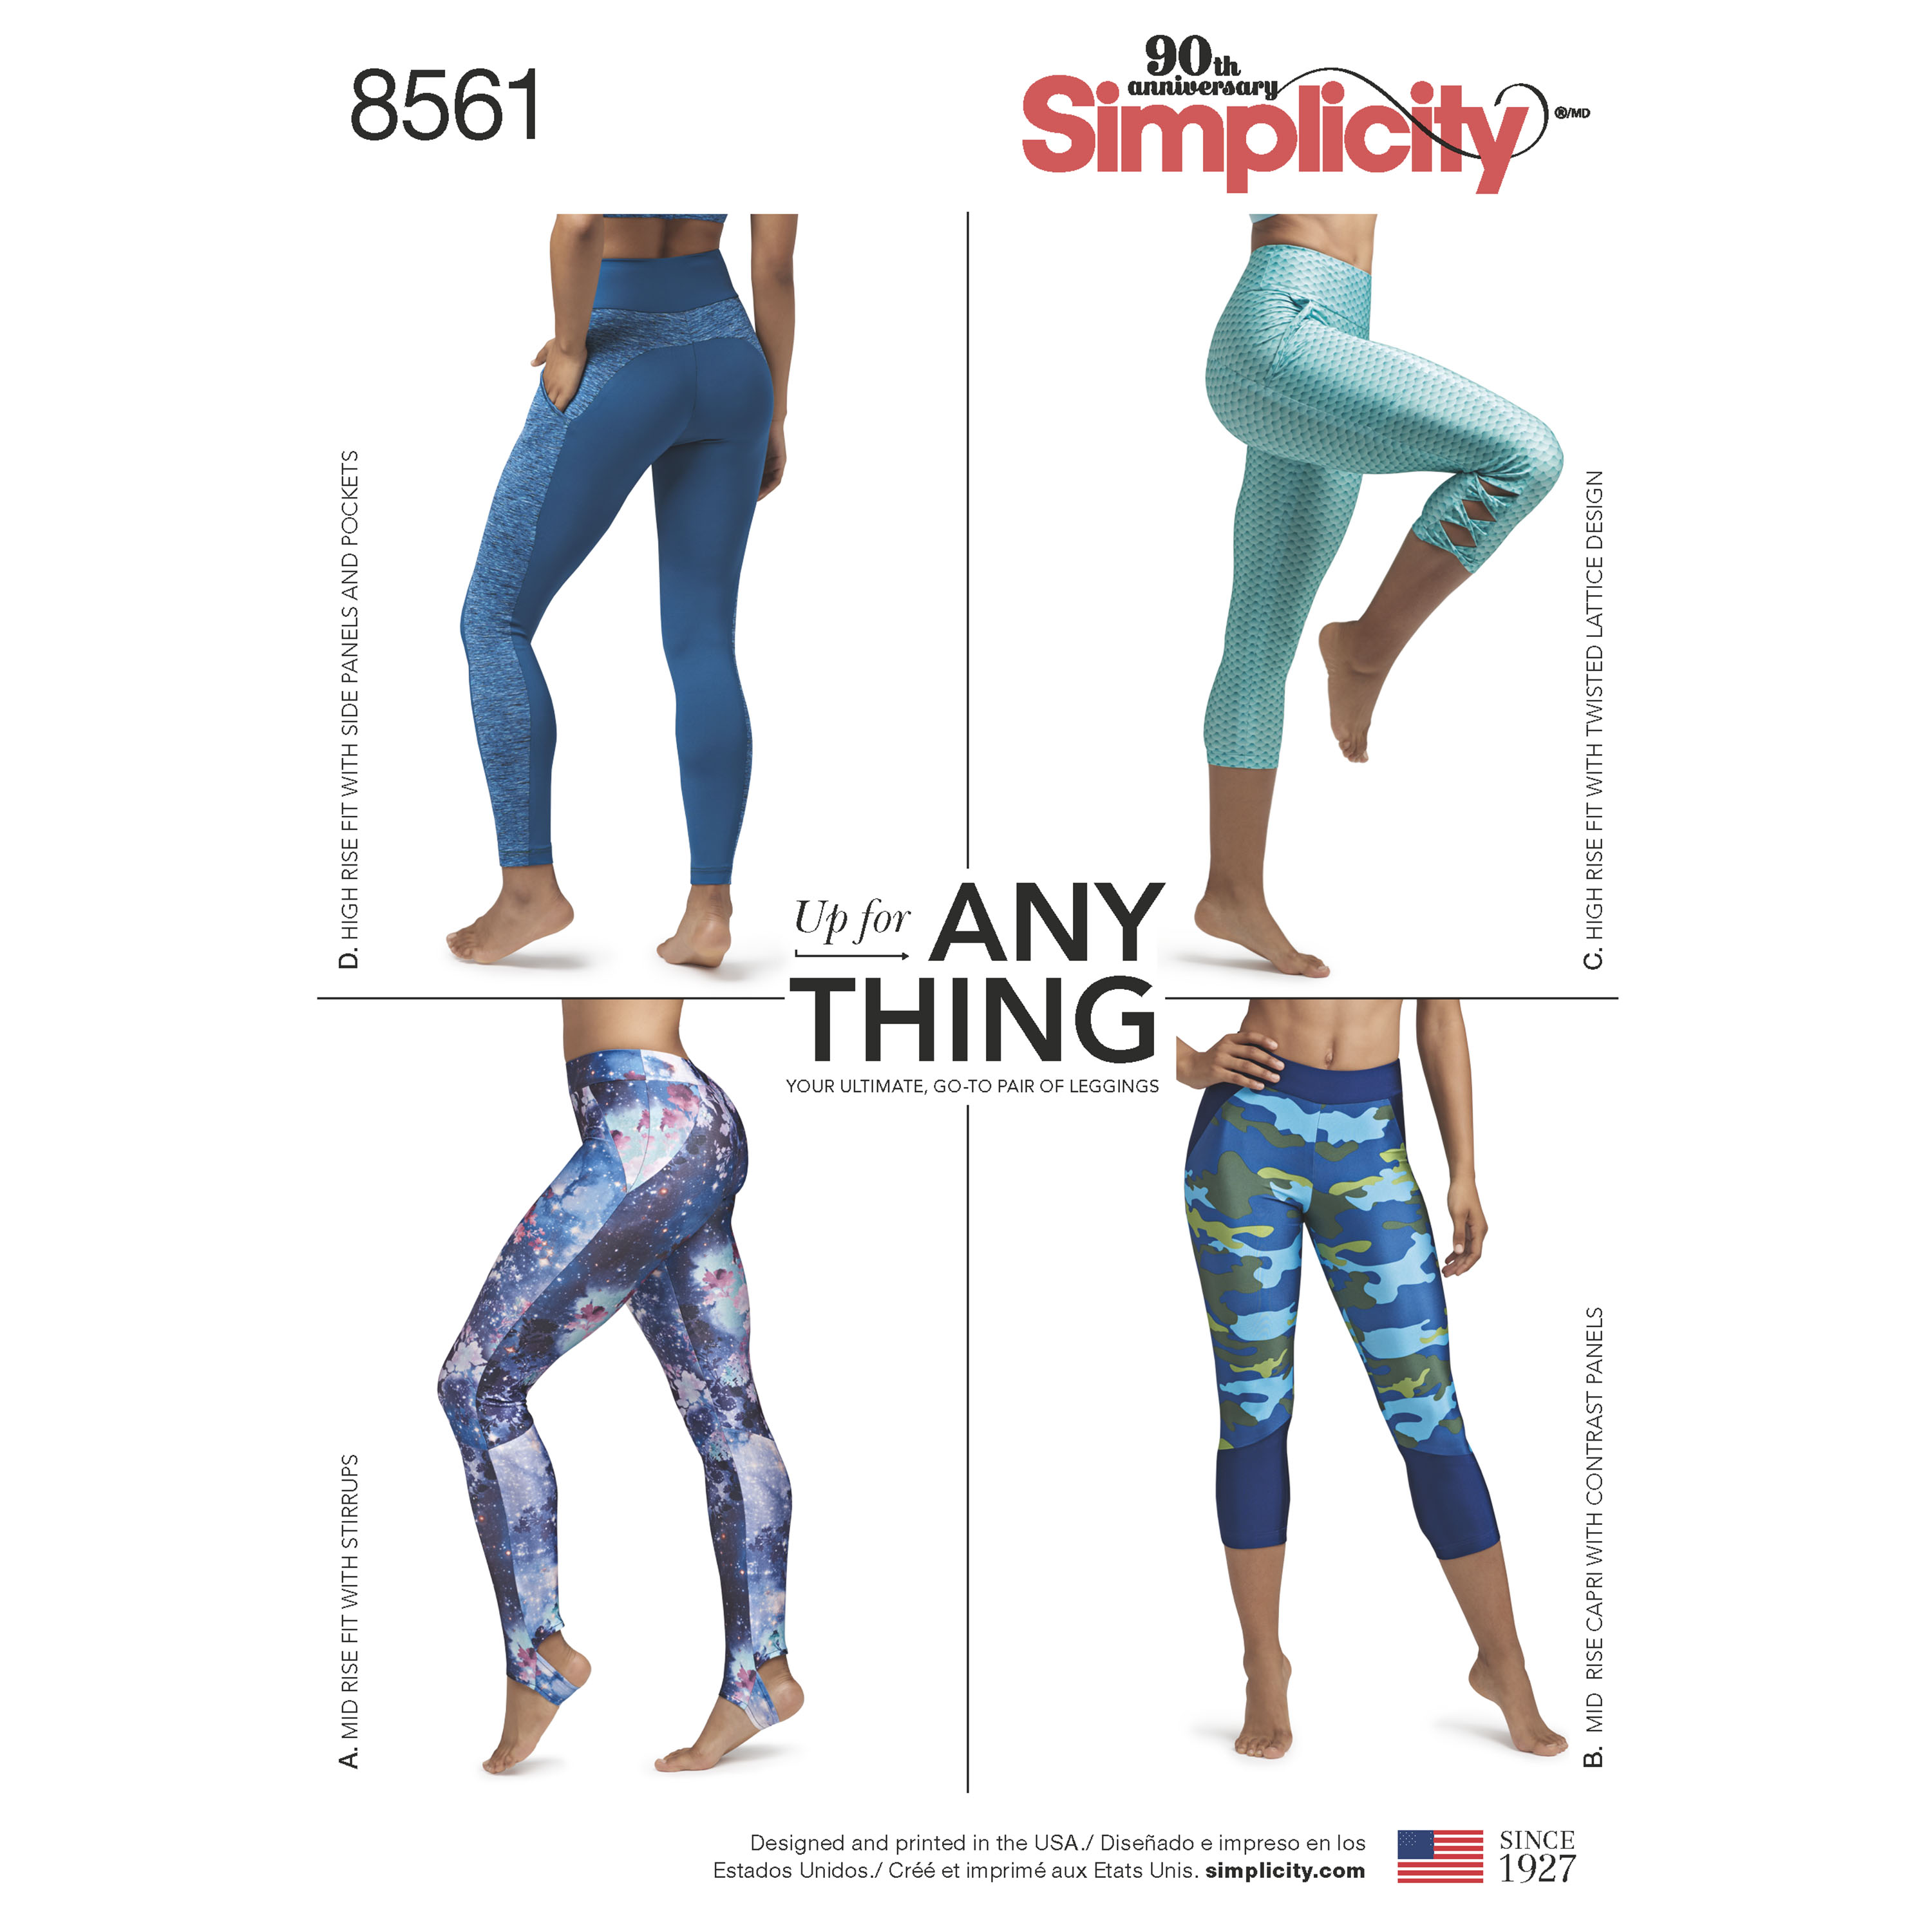 https://images.patternreview.com/sewing/patterns/simplicity/2017/8561/8561.jpg